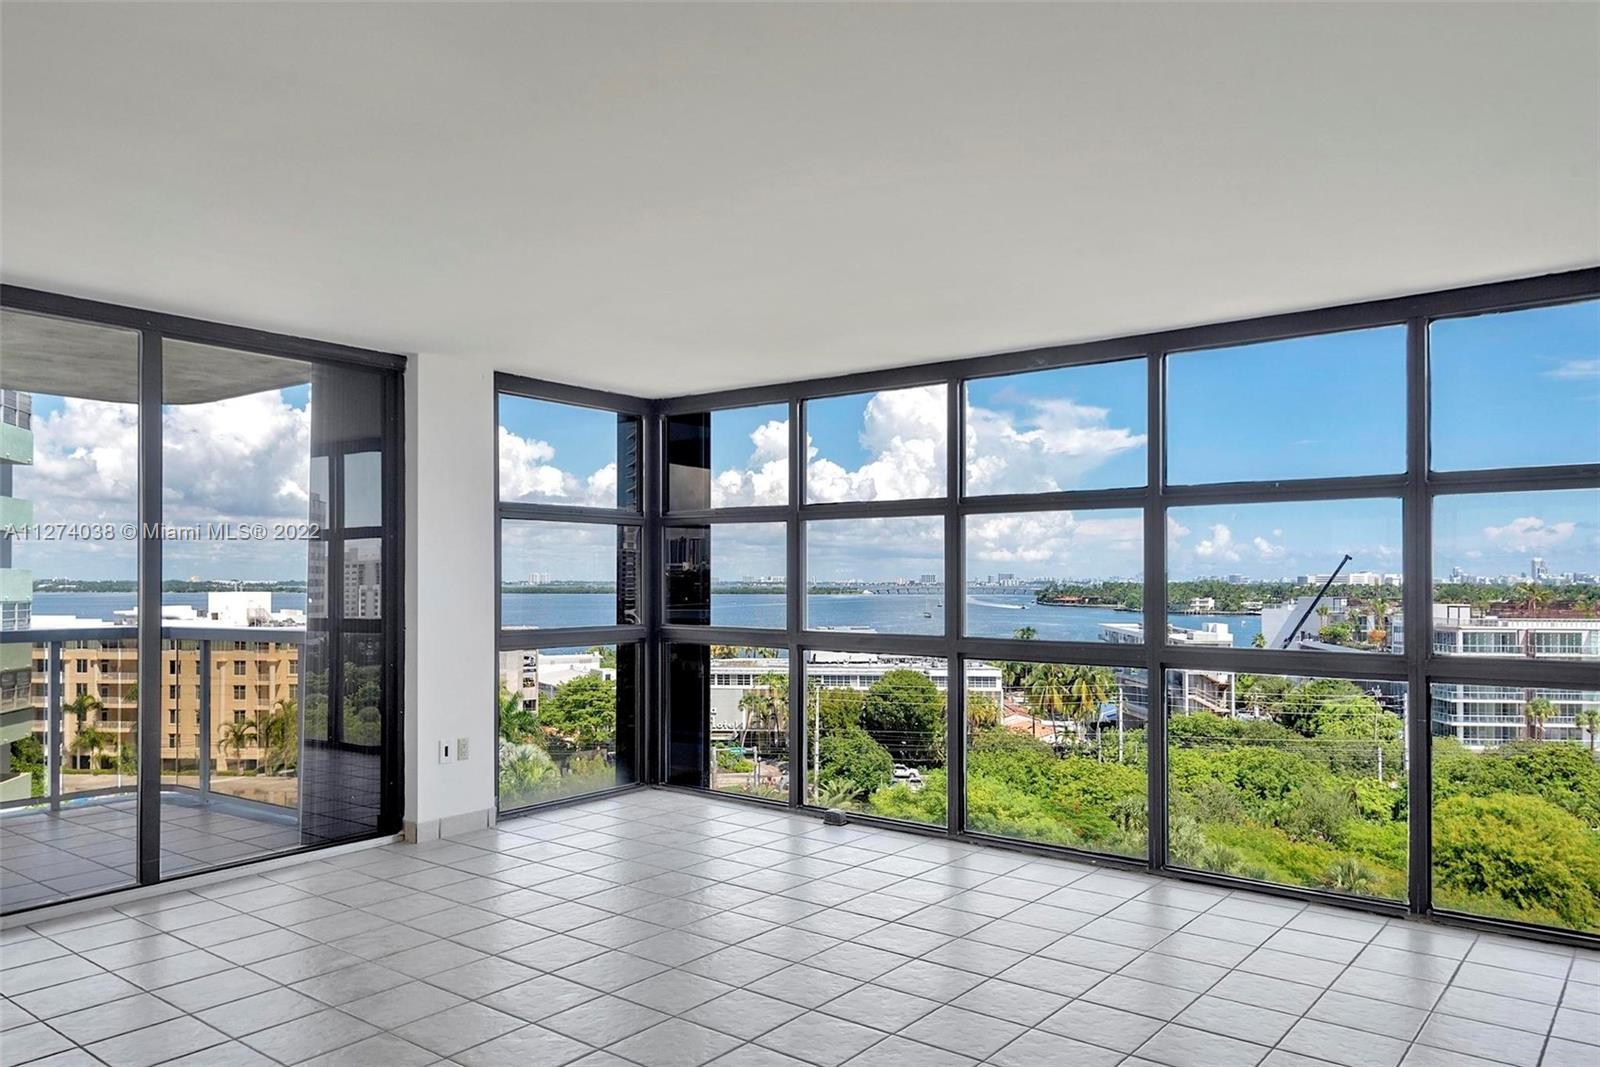 This rarely available "15" line corner unit has all the views: wide bay, lush park and the dazzling 